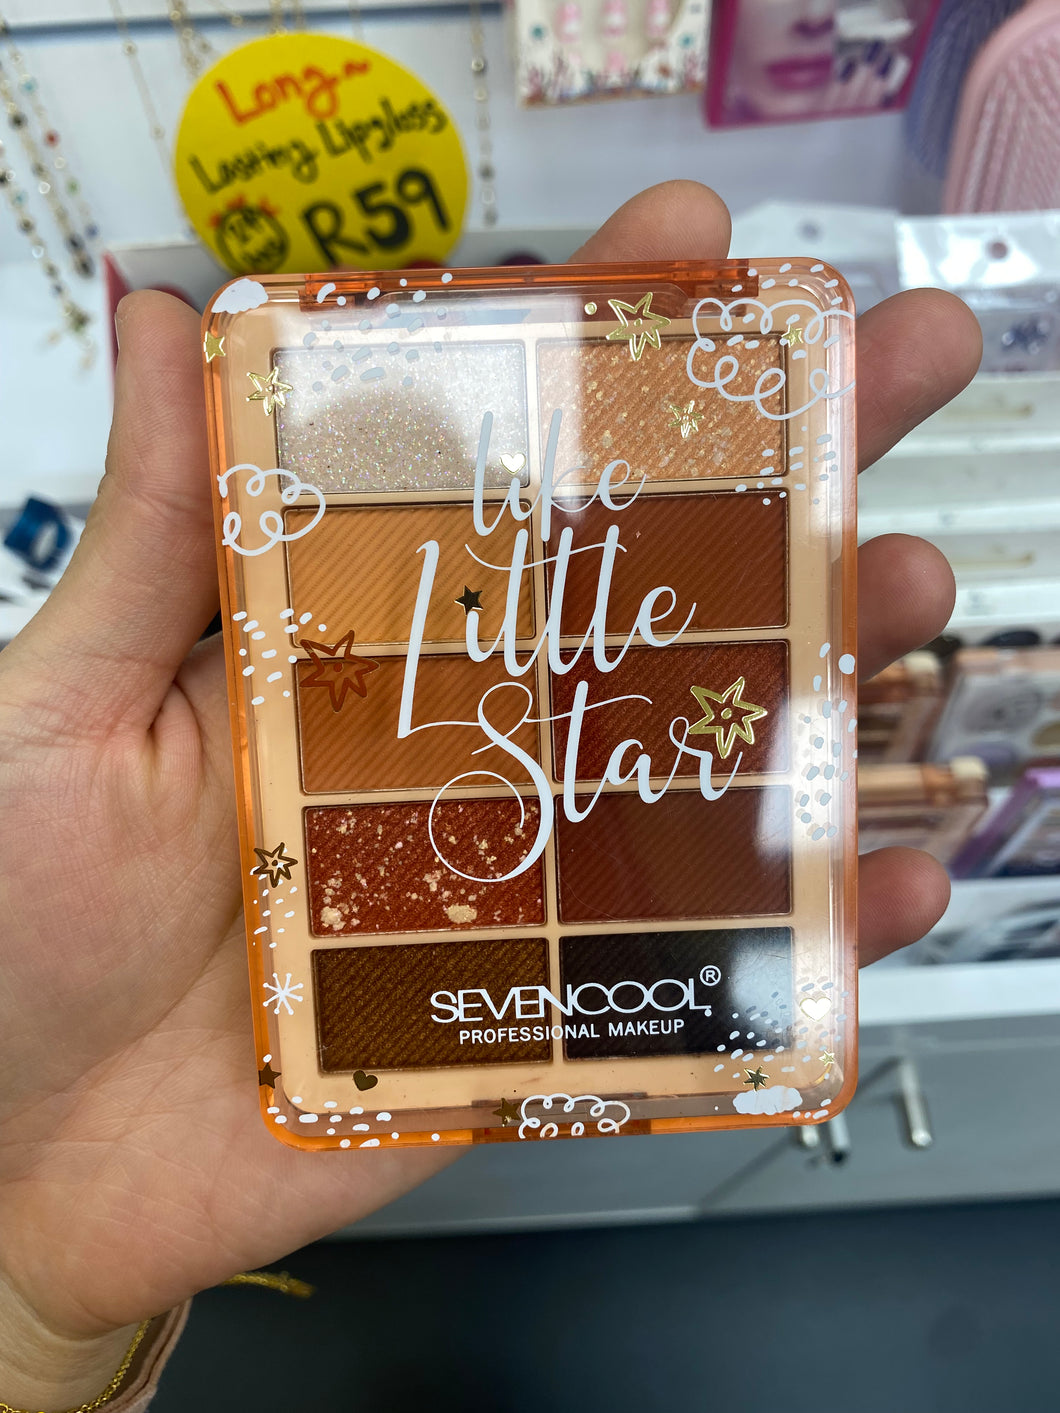 10 Colors Like Little Star Professional Makeup